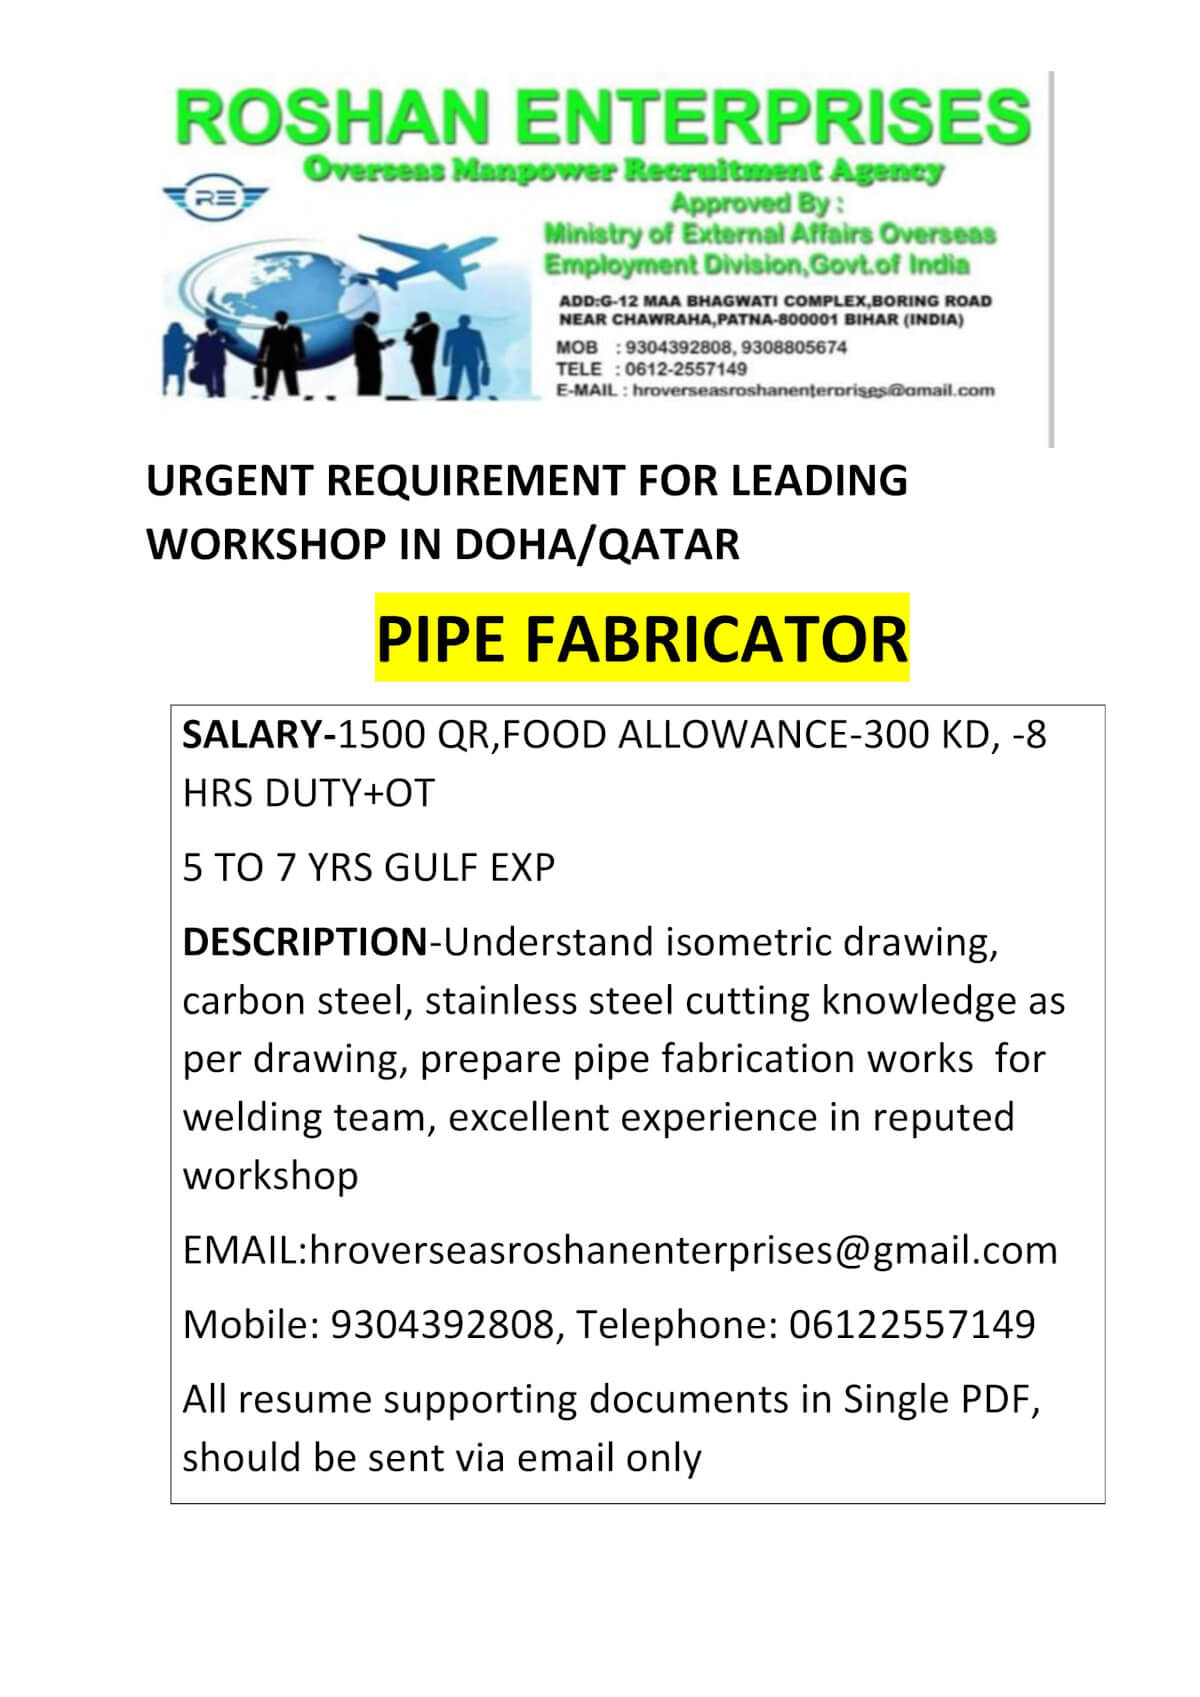 urgent requirement for reputed workshop in DOHA/QATAR